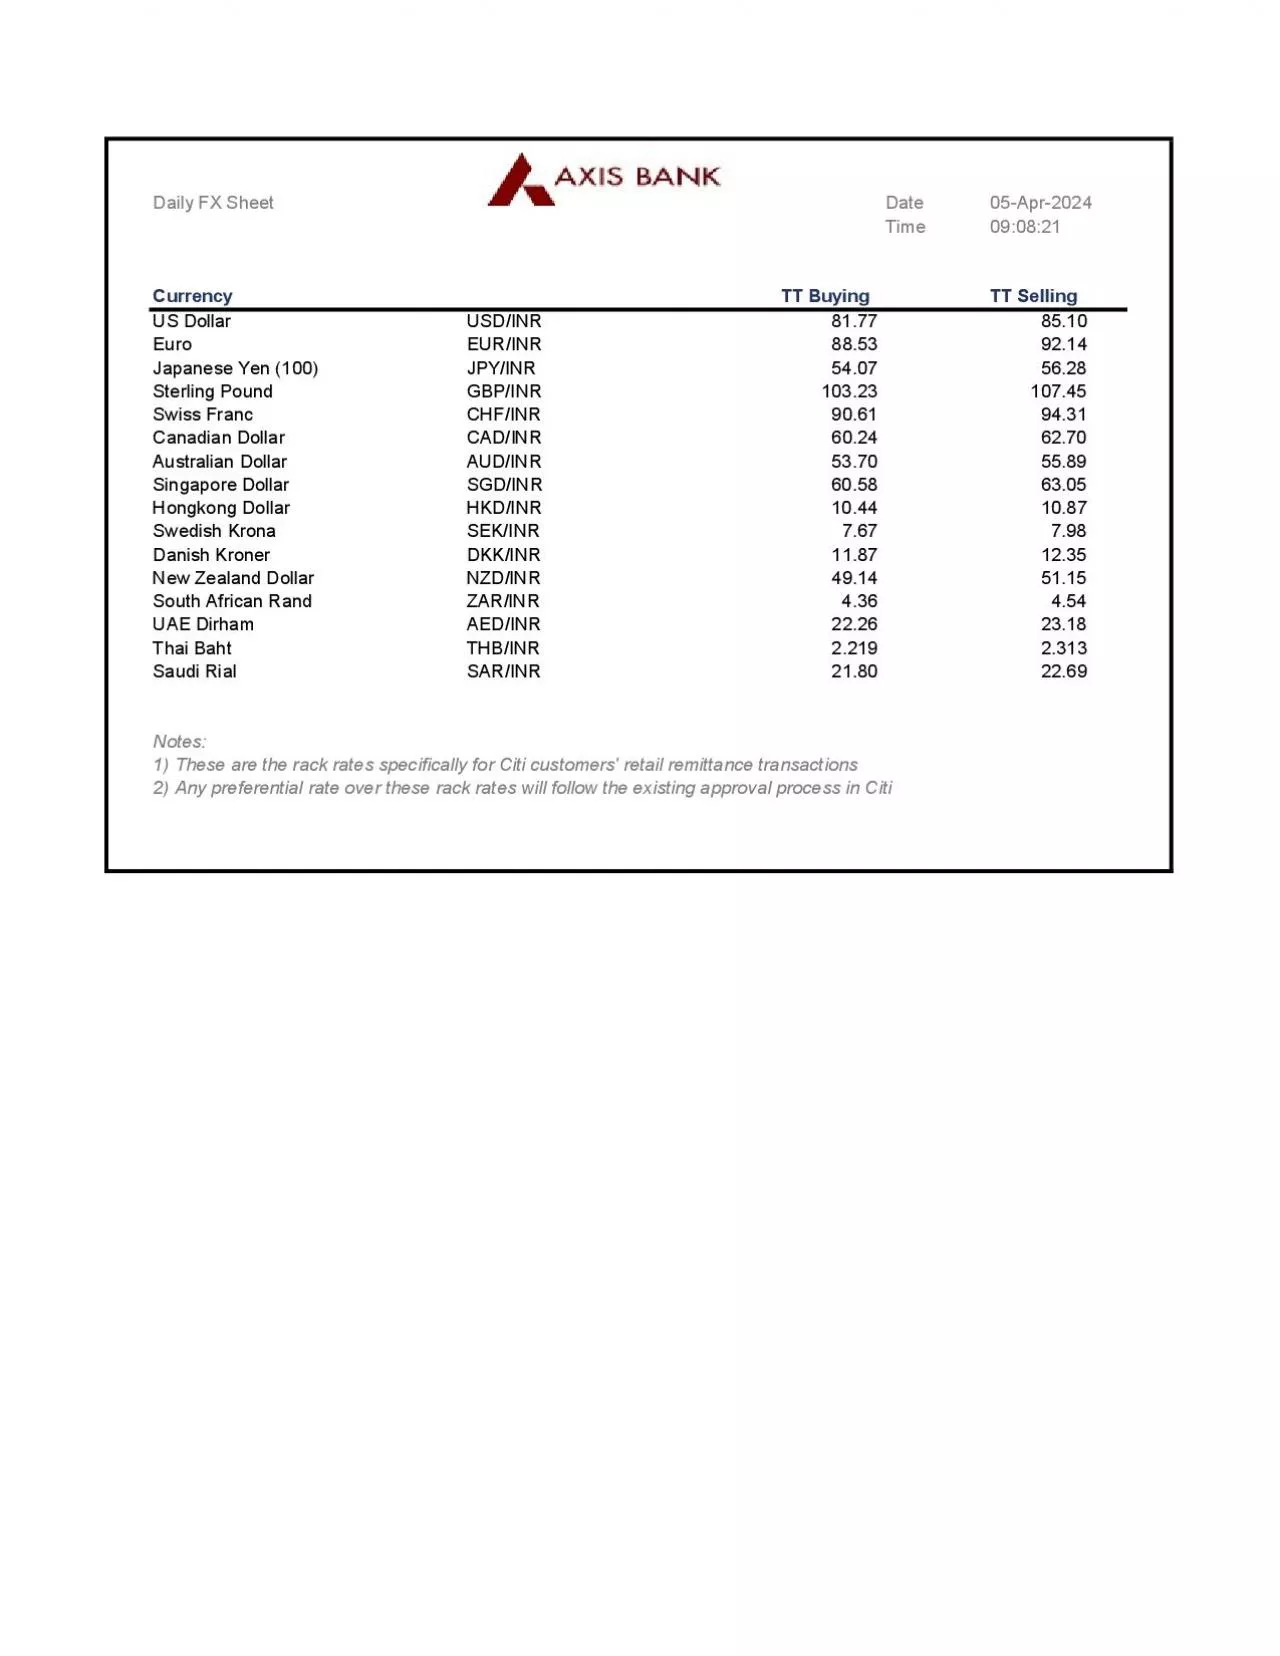 Daily FX Rate Sheet